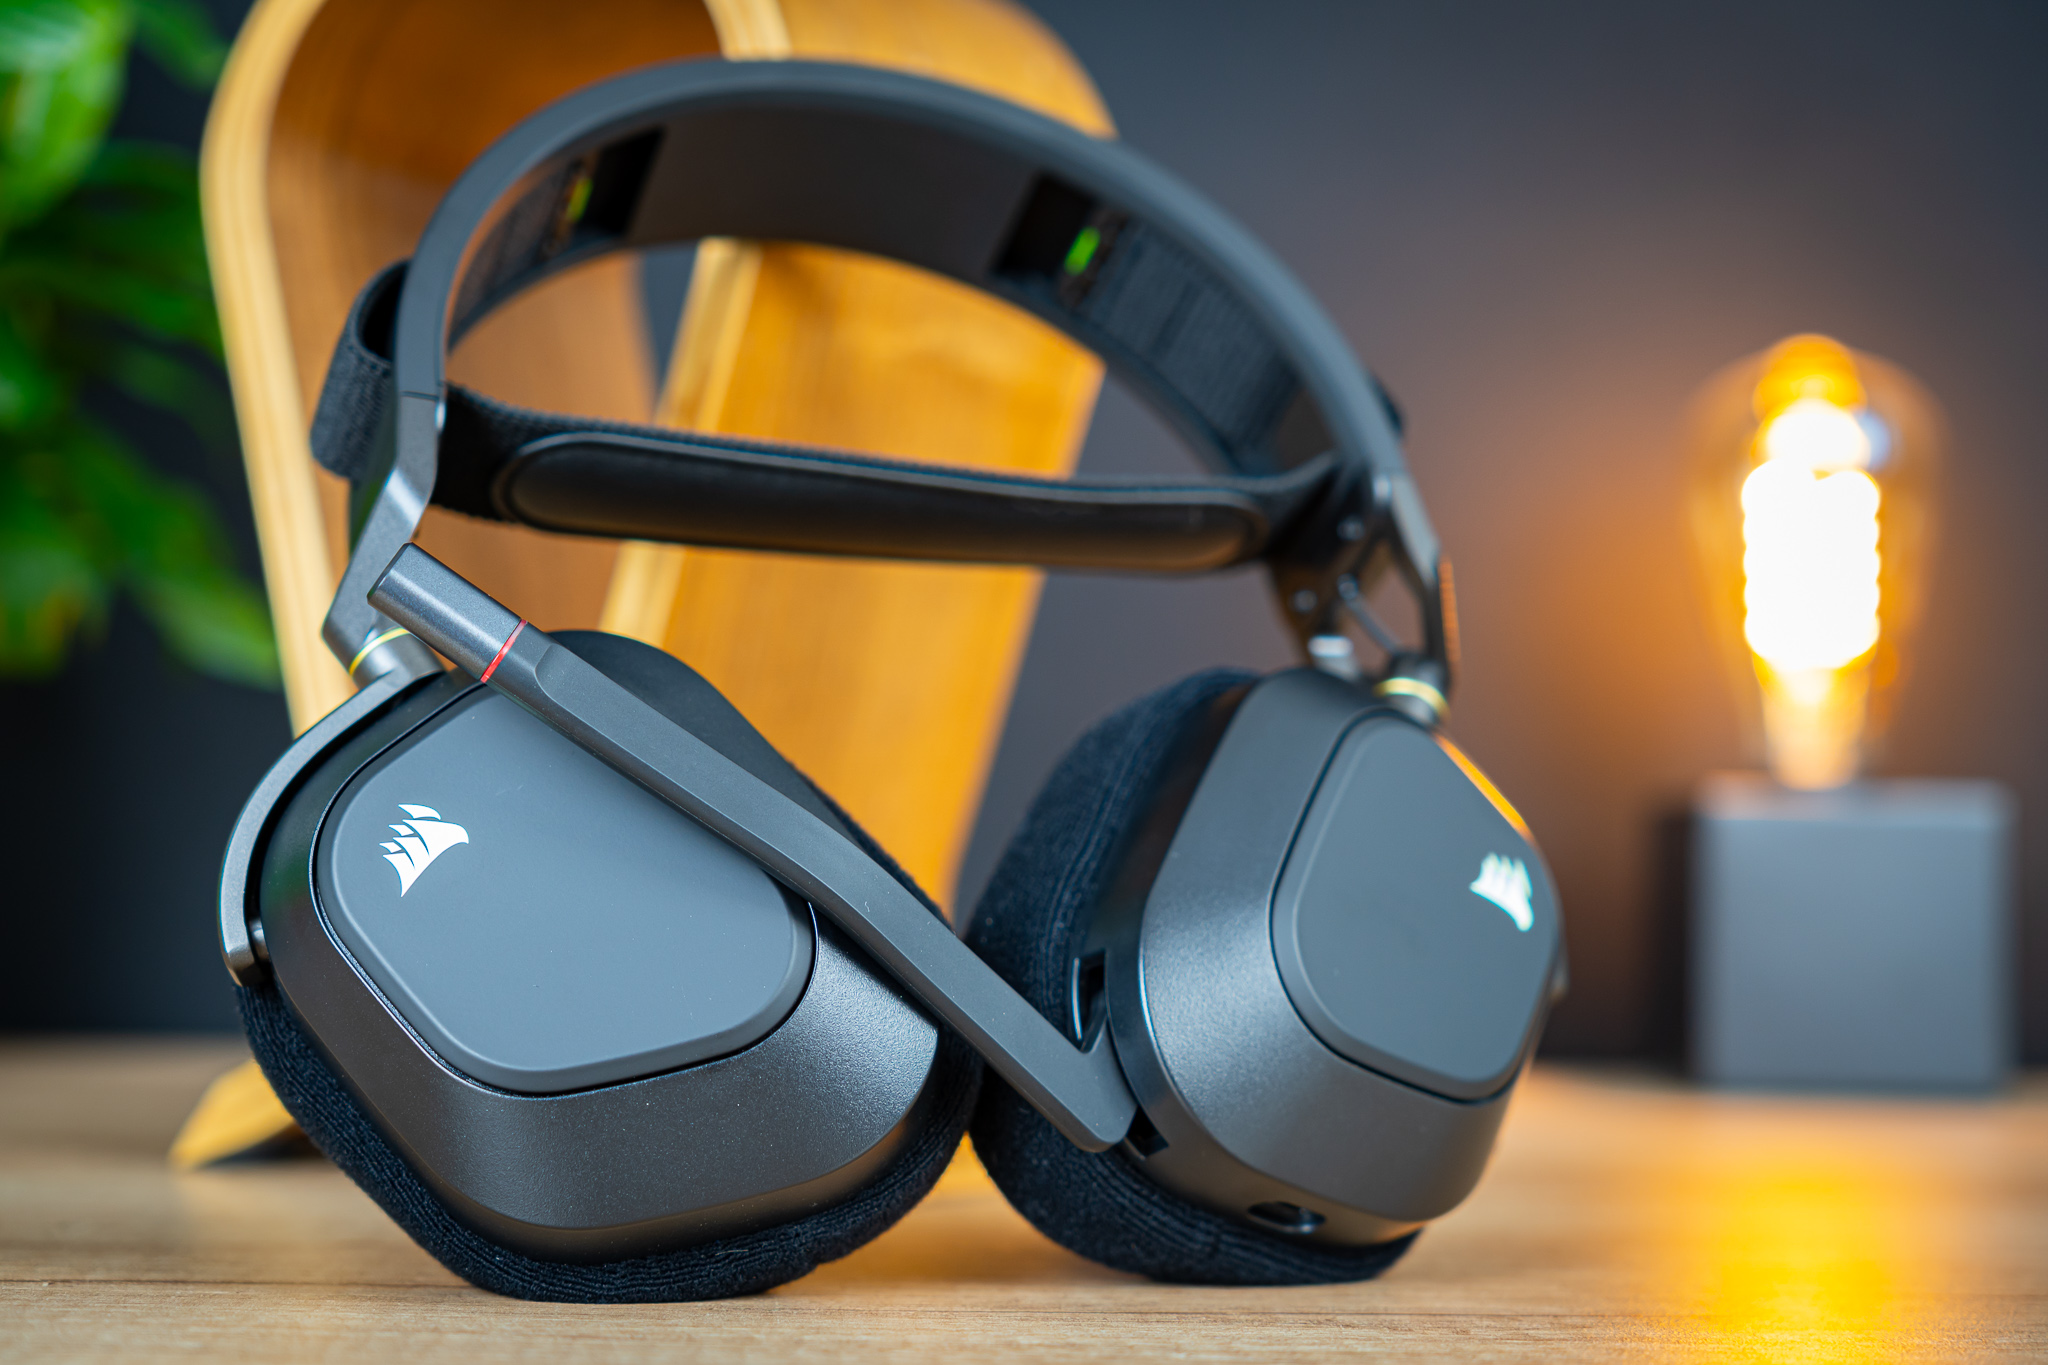 Corsair HS80 RGB Wireless Headset Review - The Deepest Dive! New color! 